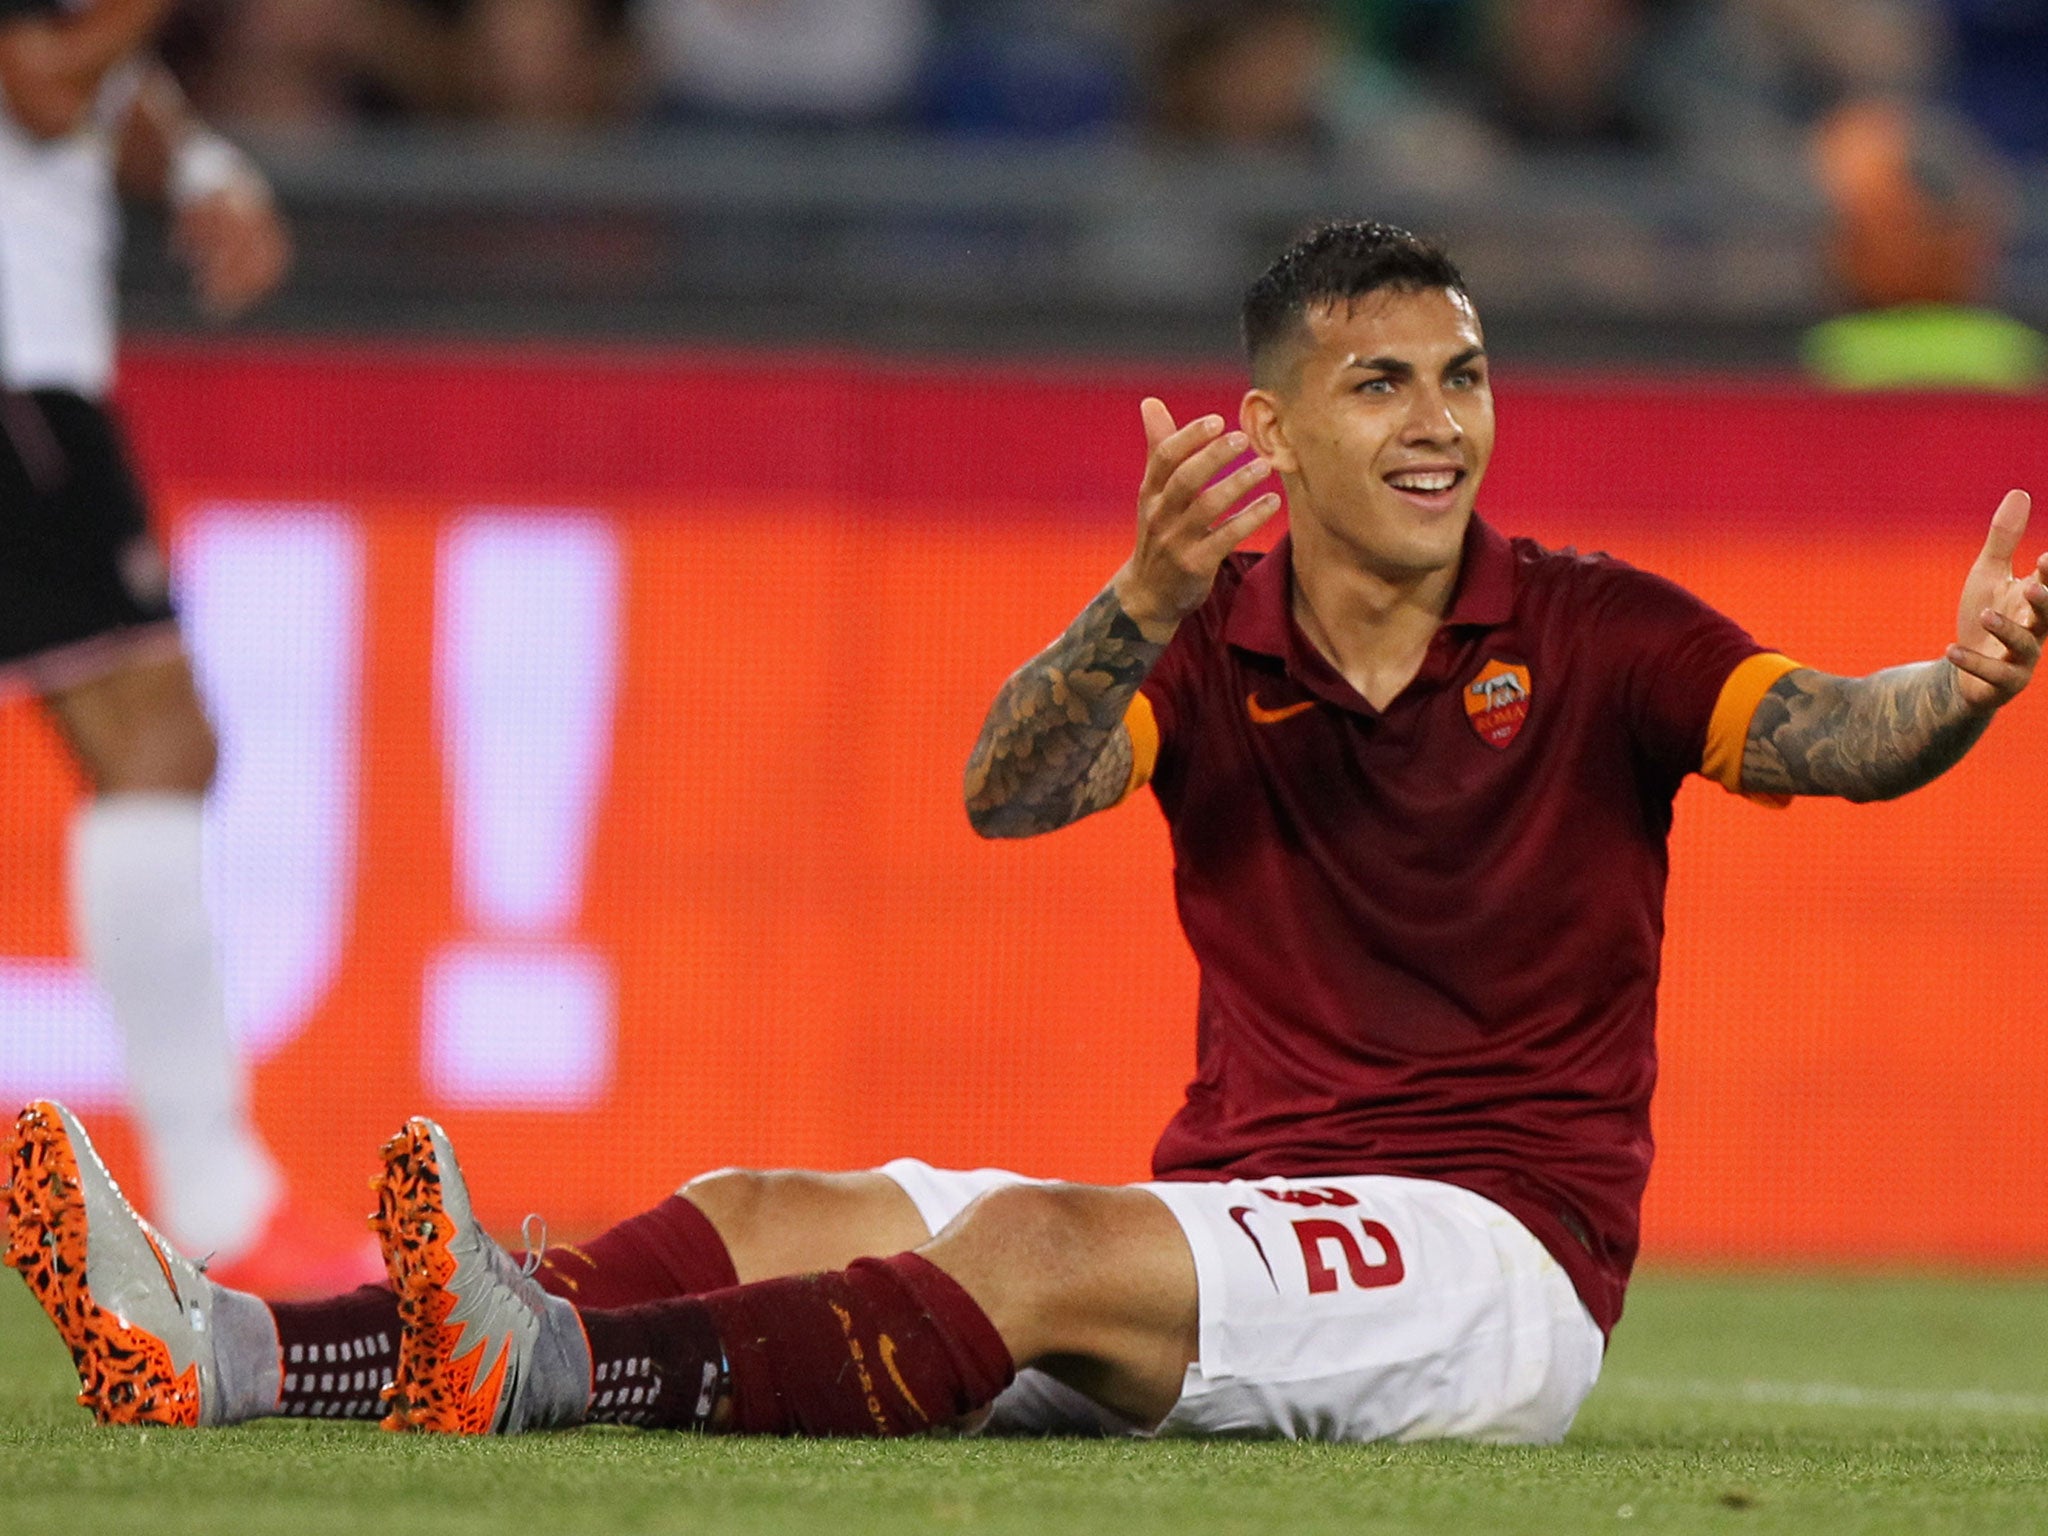 AS Roma midfielder and Liverpool target Leandro Paredes